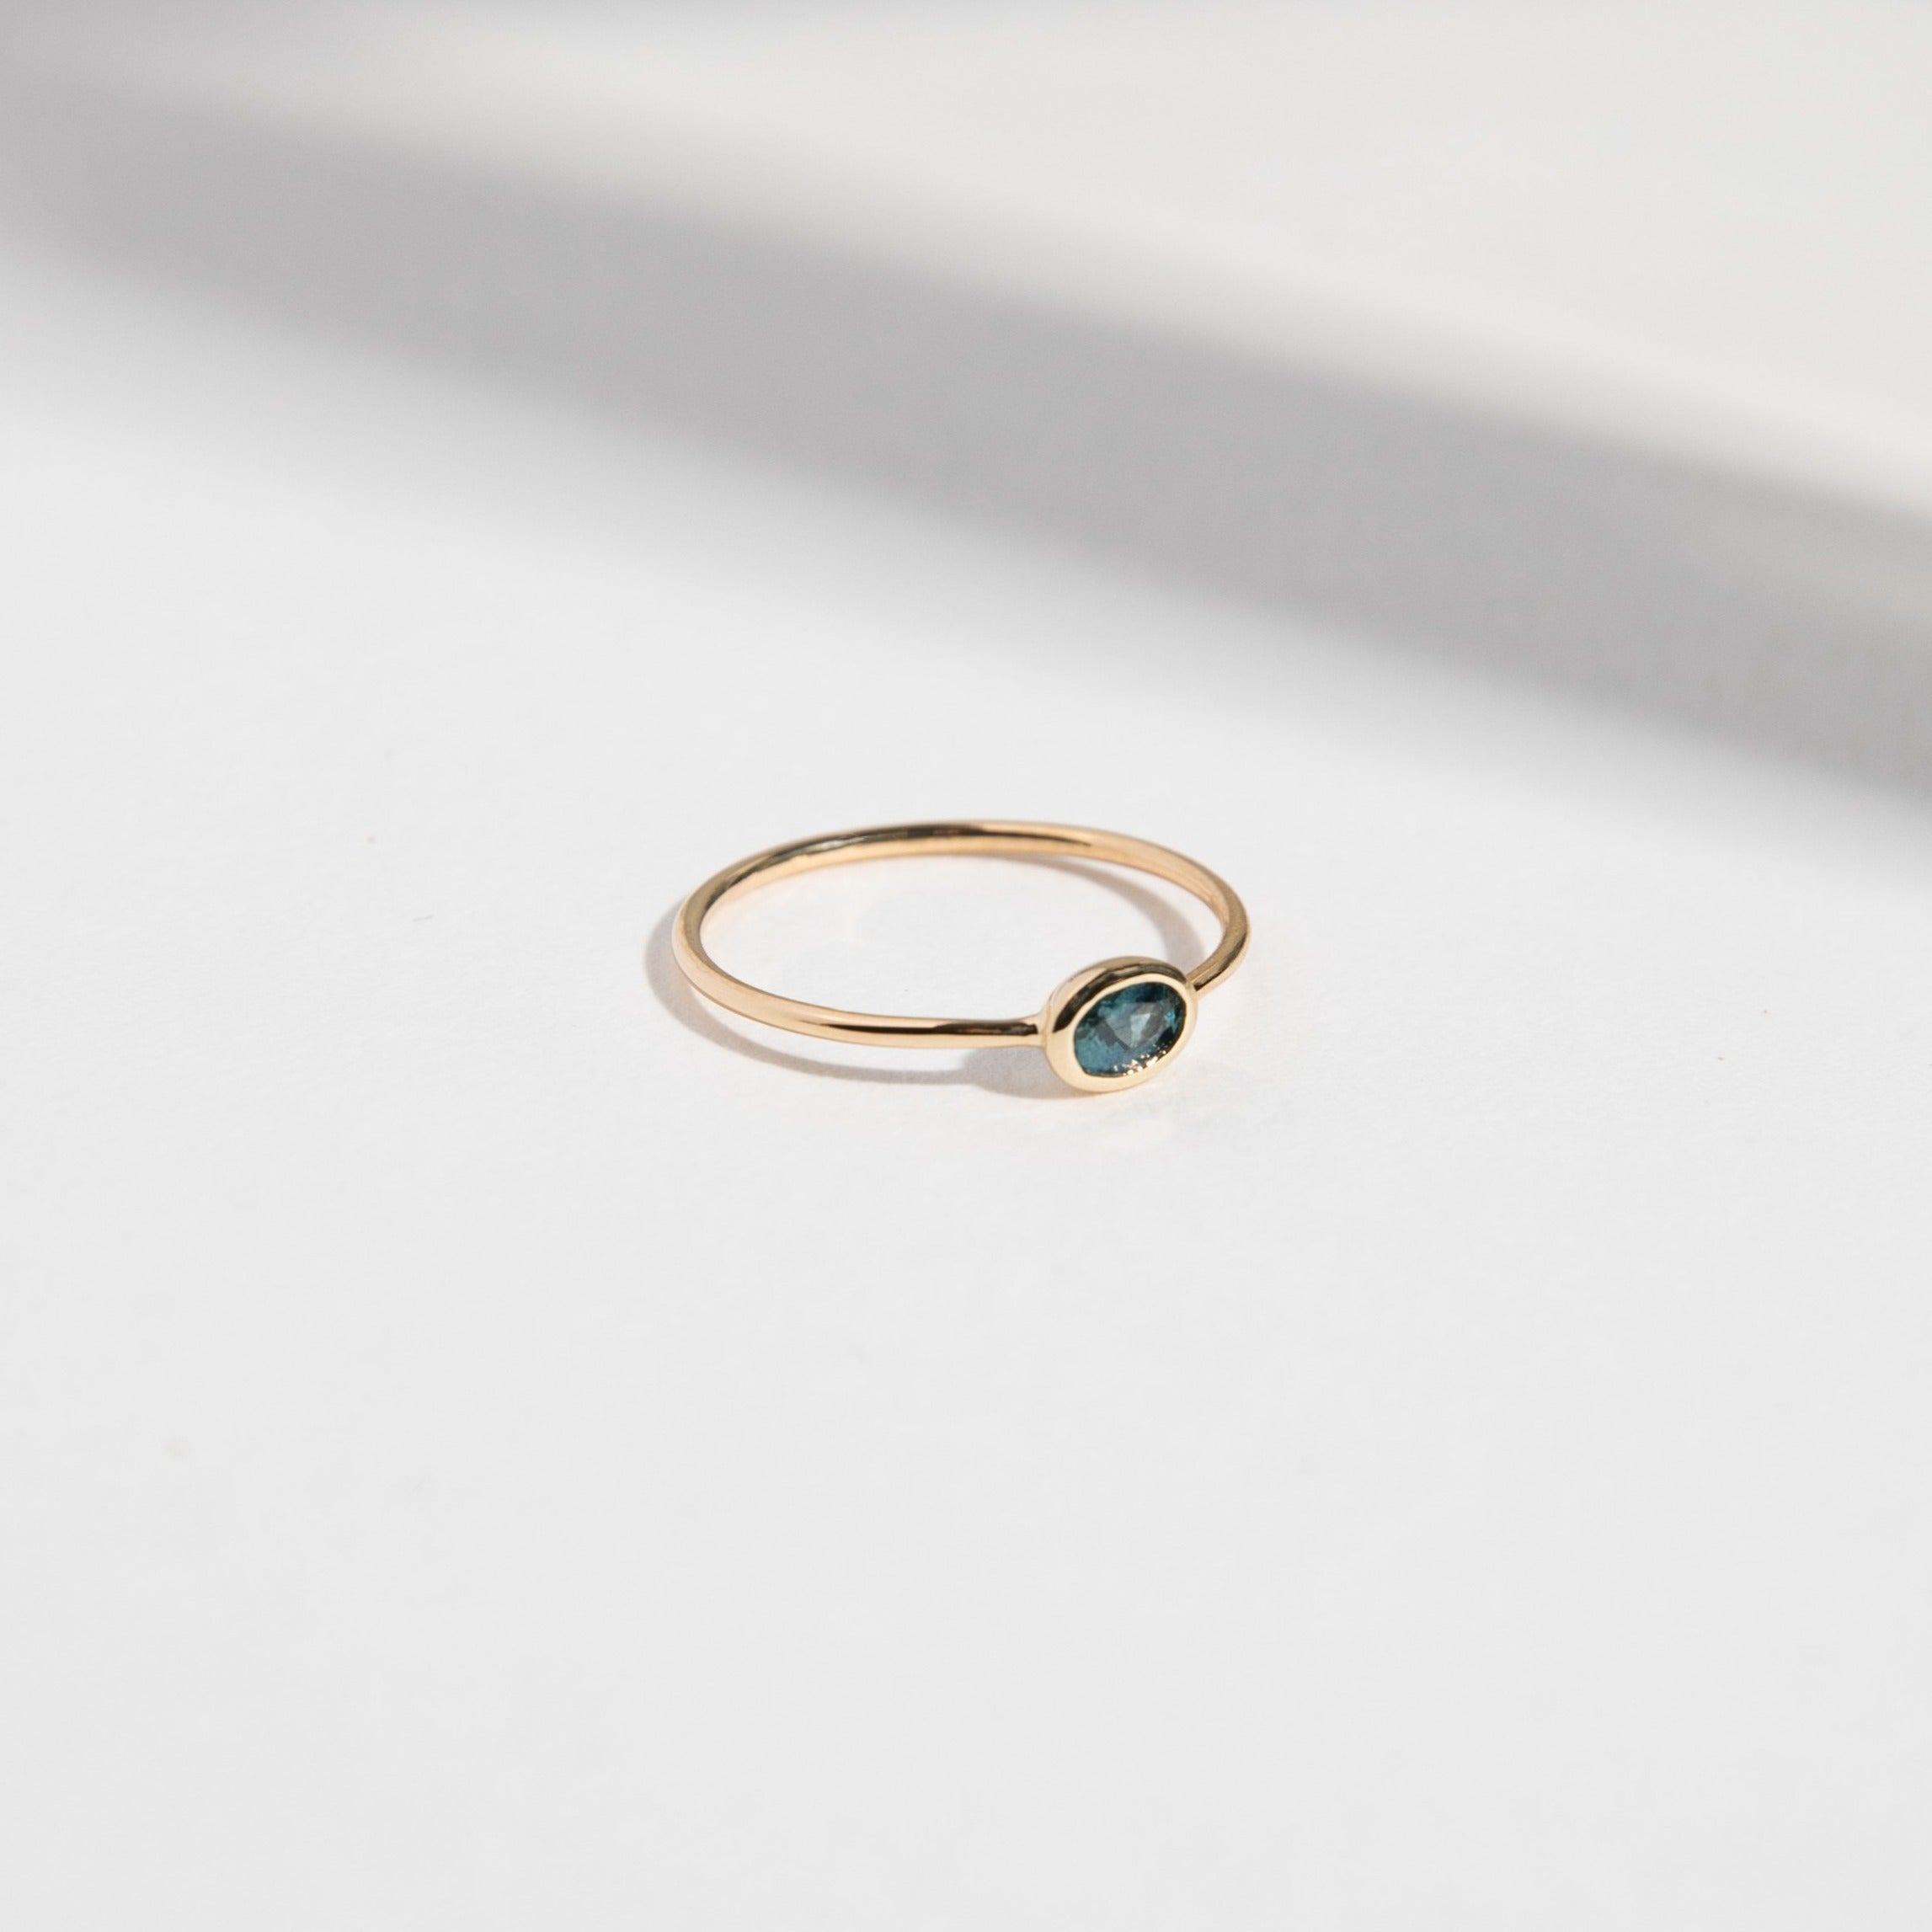 Ana Thin Ring in 14k Gold set with a 0.3ct blue sapphire by SHW Fine Jewelry